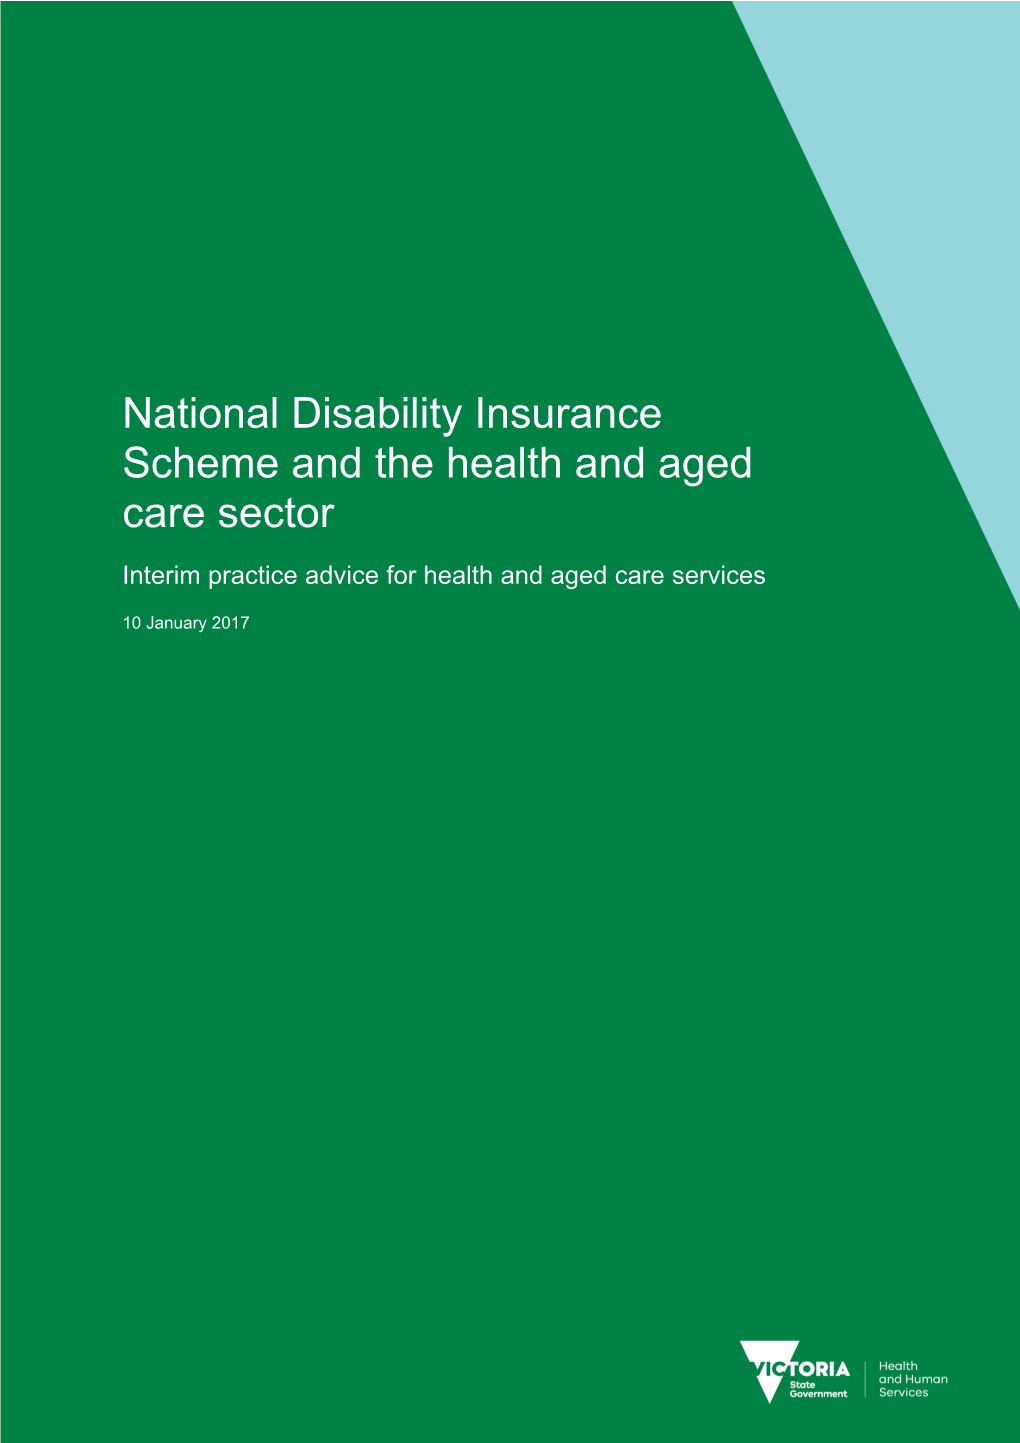 NDIS Practice Advice for Health and Aged Care Sector